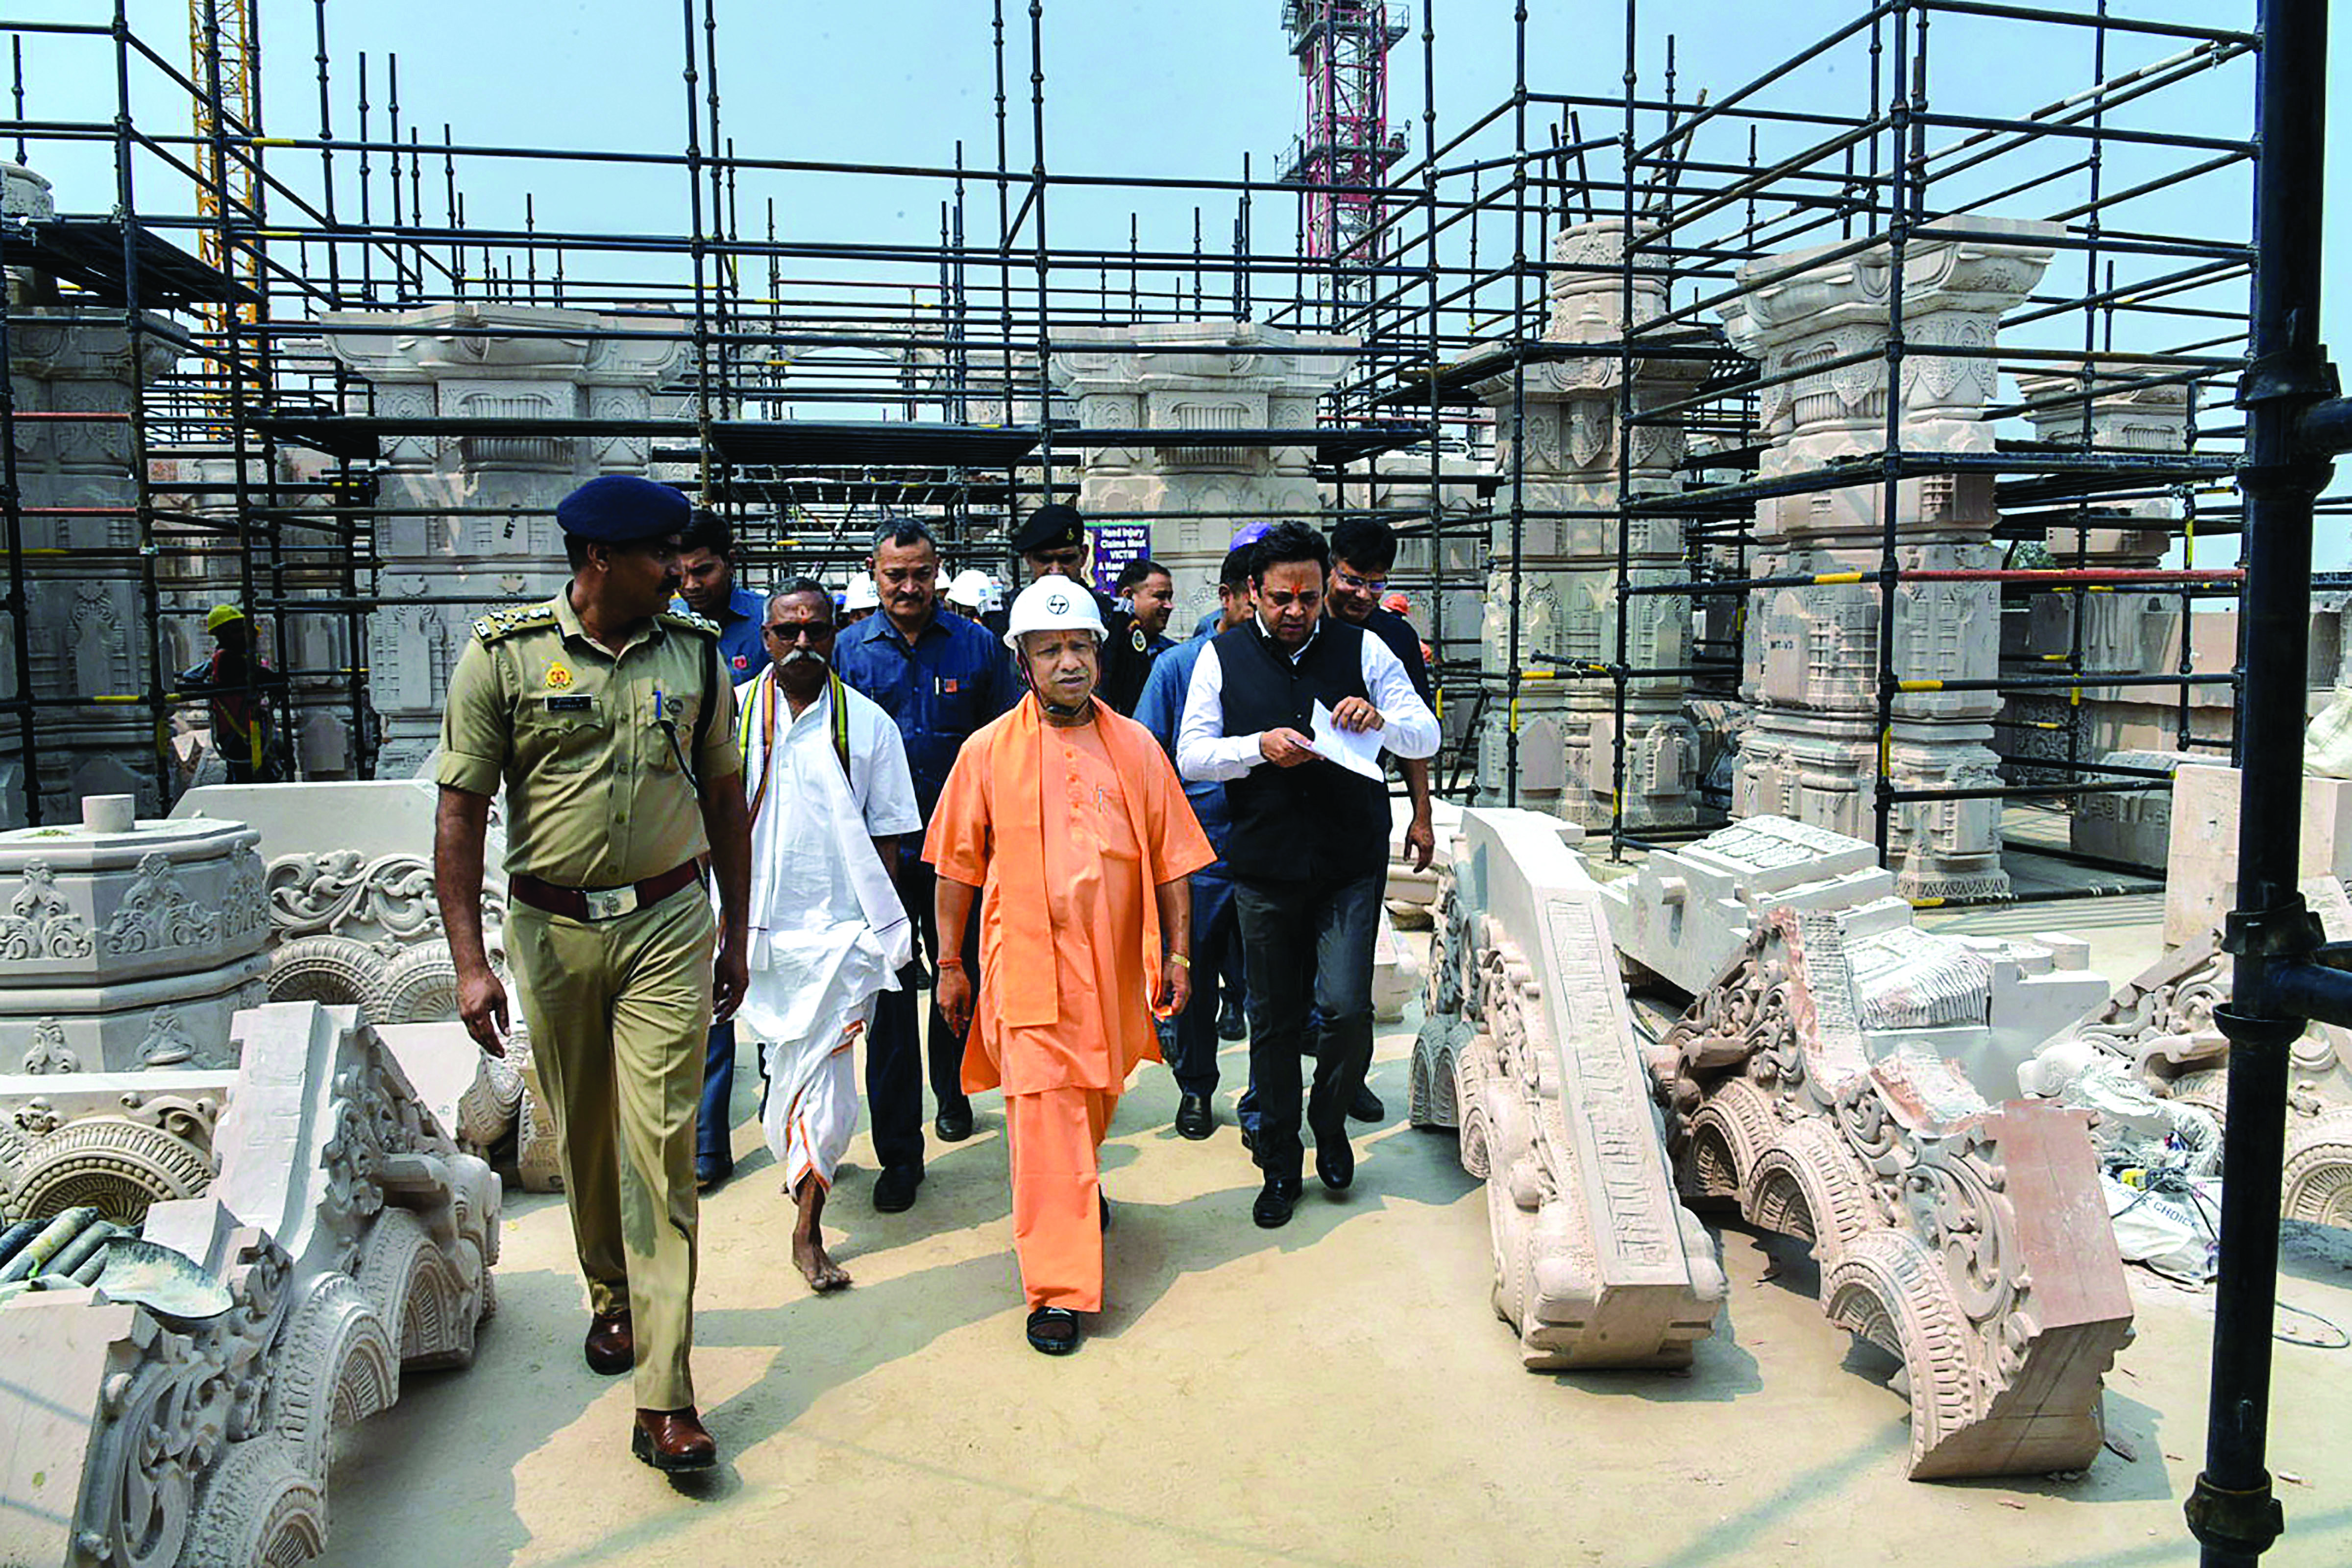 World will see Ayodhya as the most beautiful city: CM